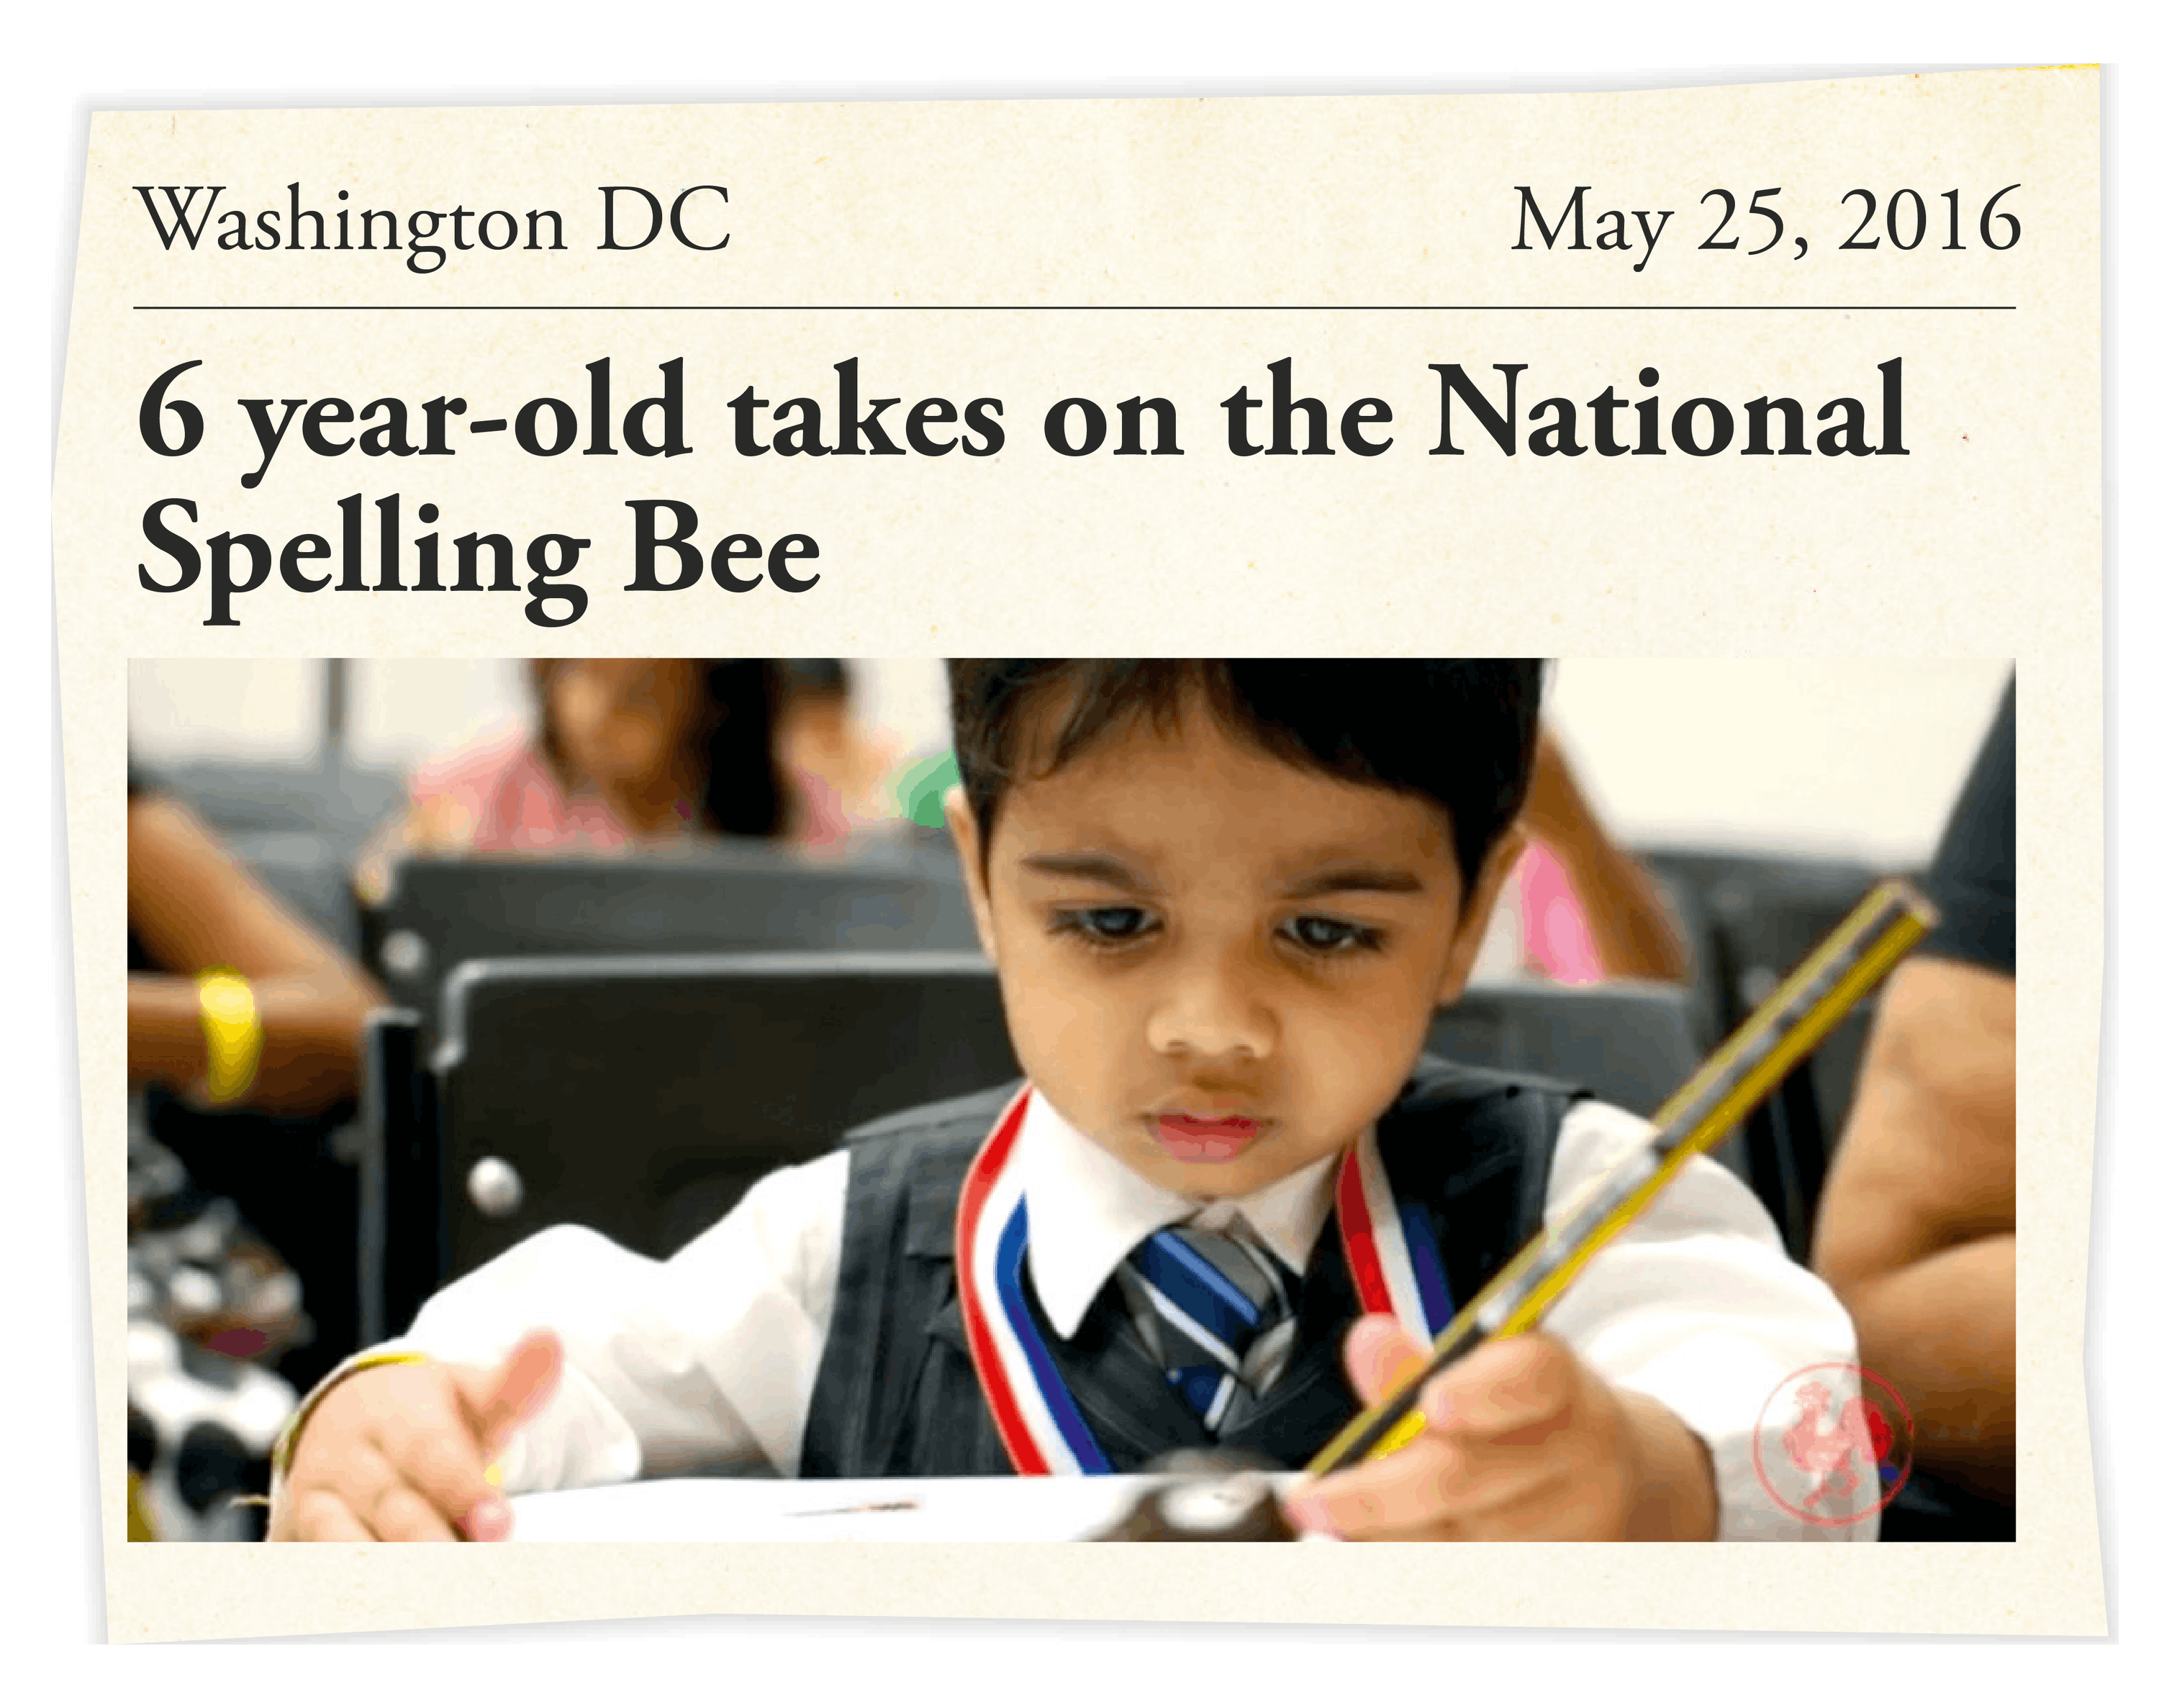 6 year-old takes on the National Spelling Bee